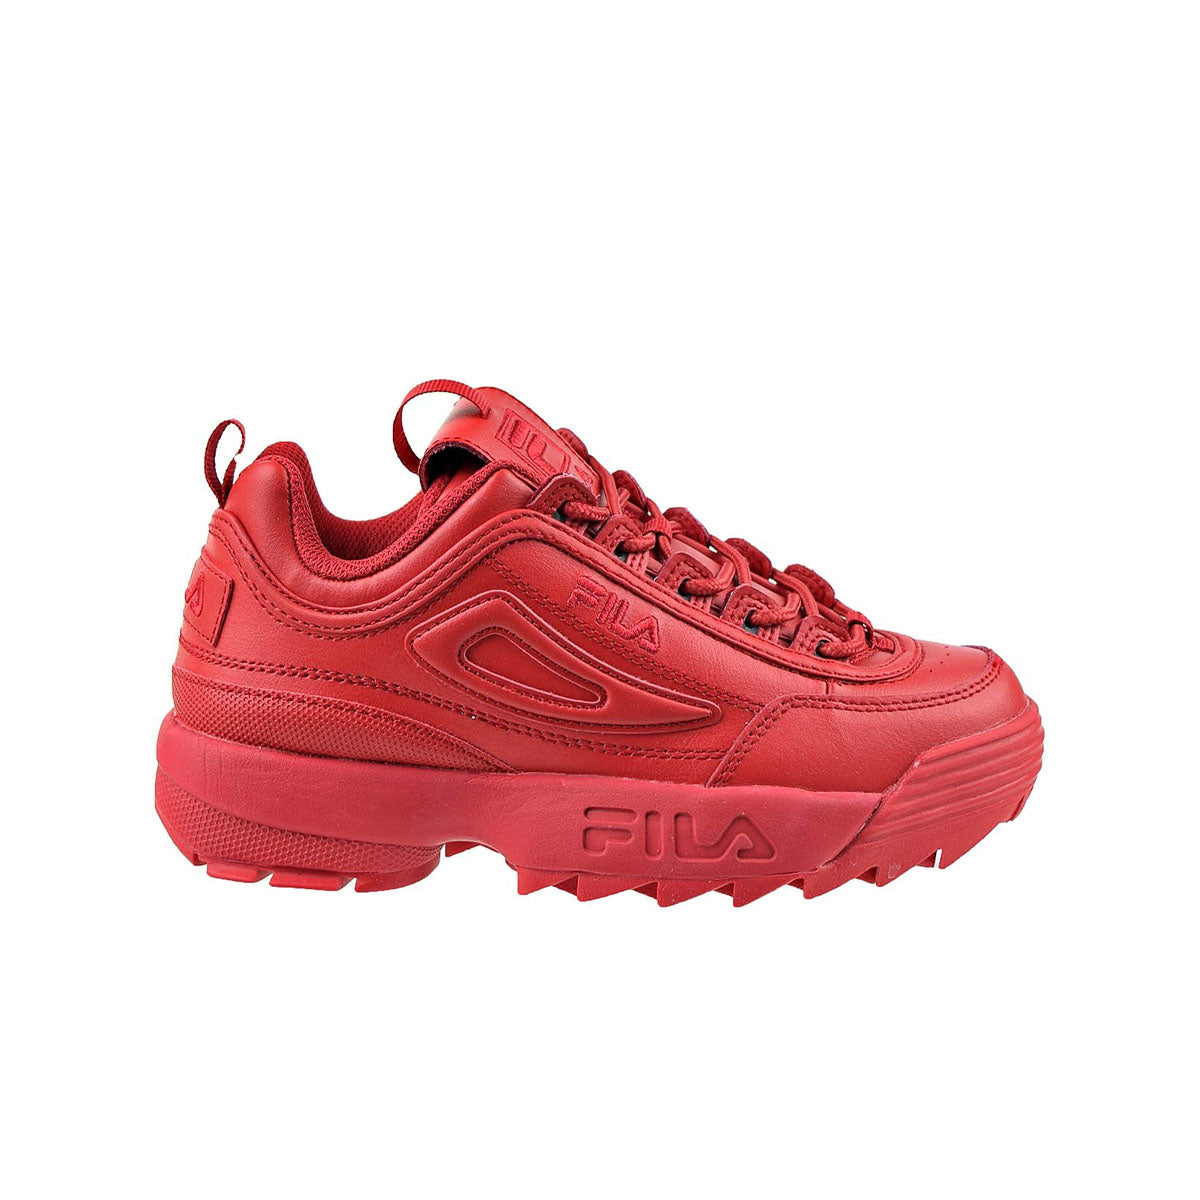 FILA DISRUPTOR II PREMIUM REPEAT - PINK  Pink sneakers, Womens athletic  shoes, Sneakers fashion